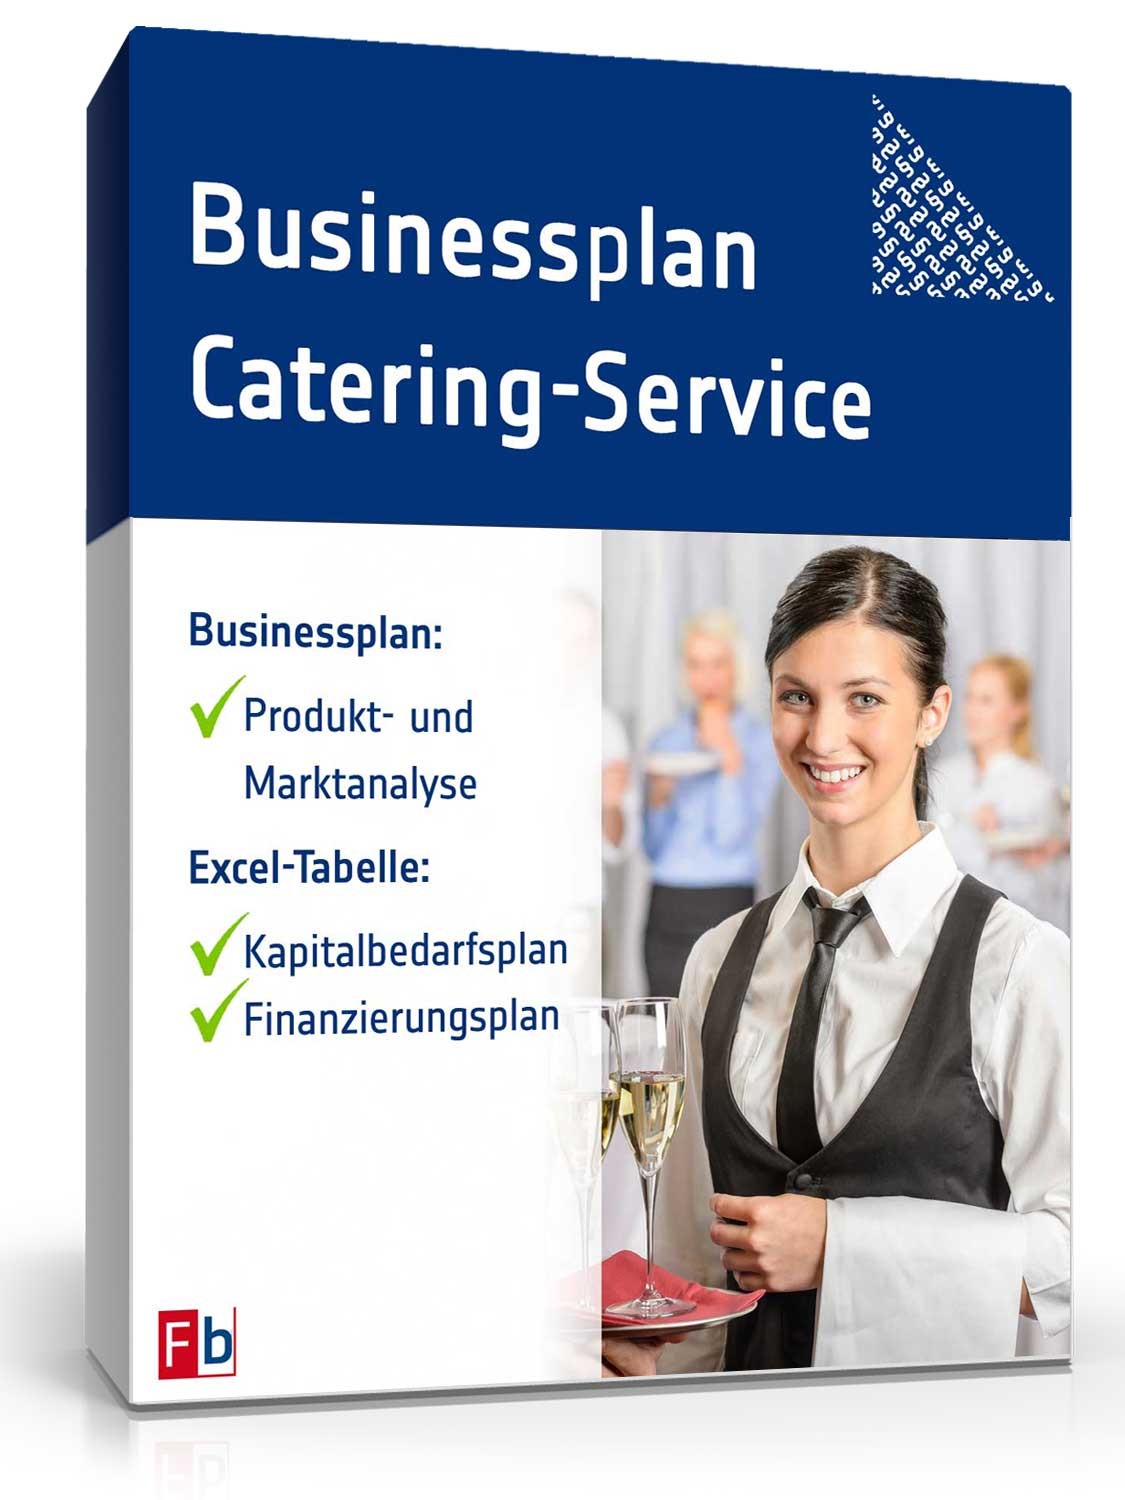 business plan catering services